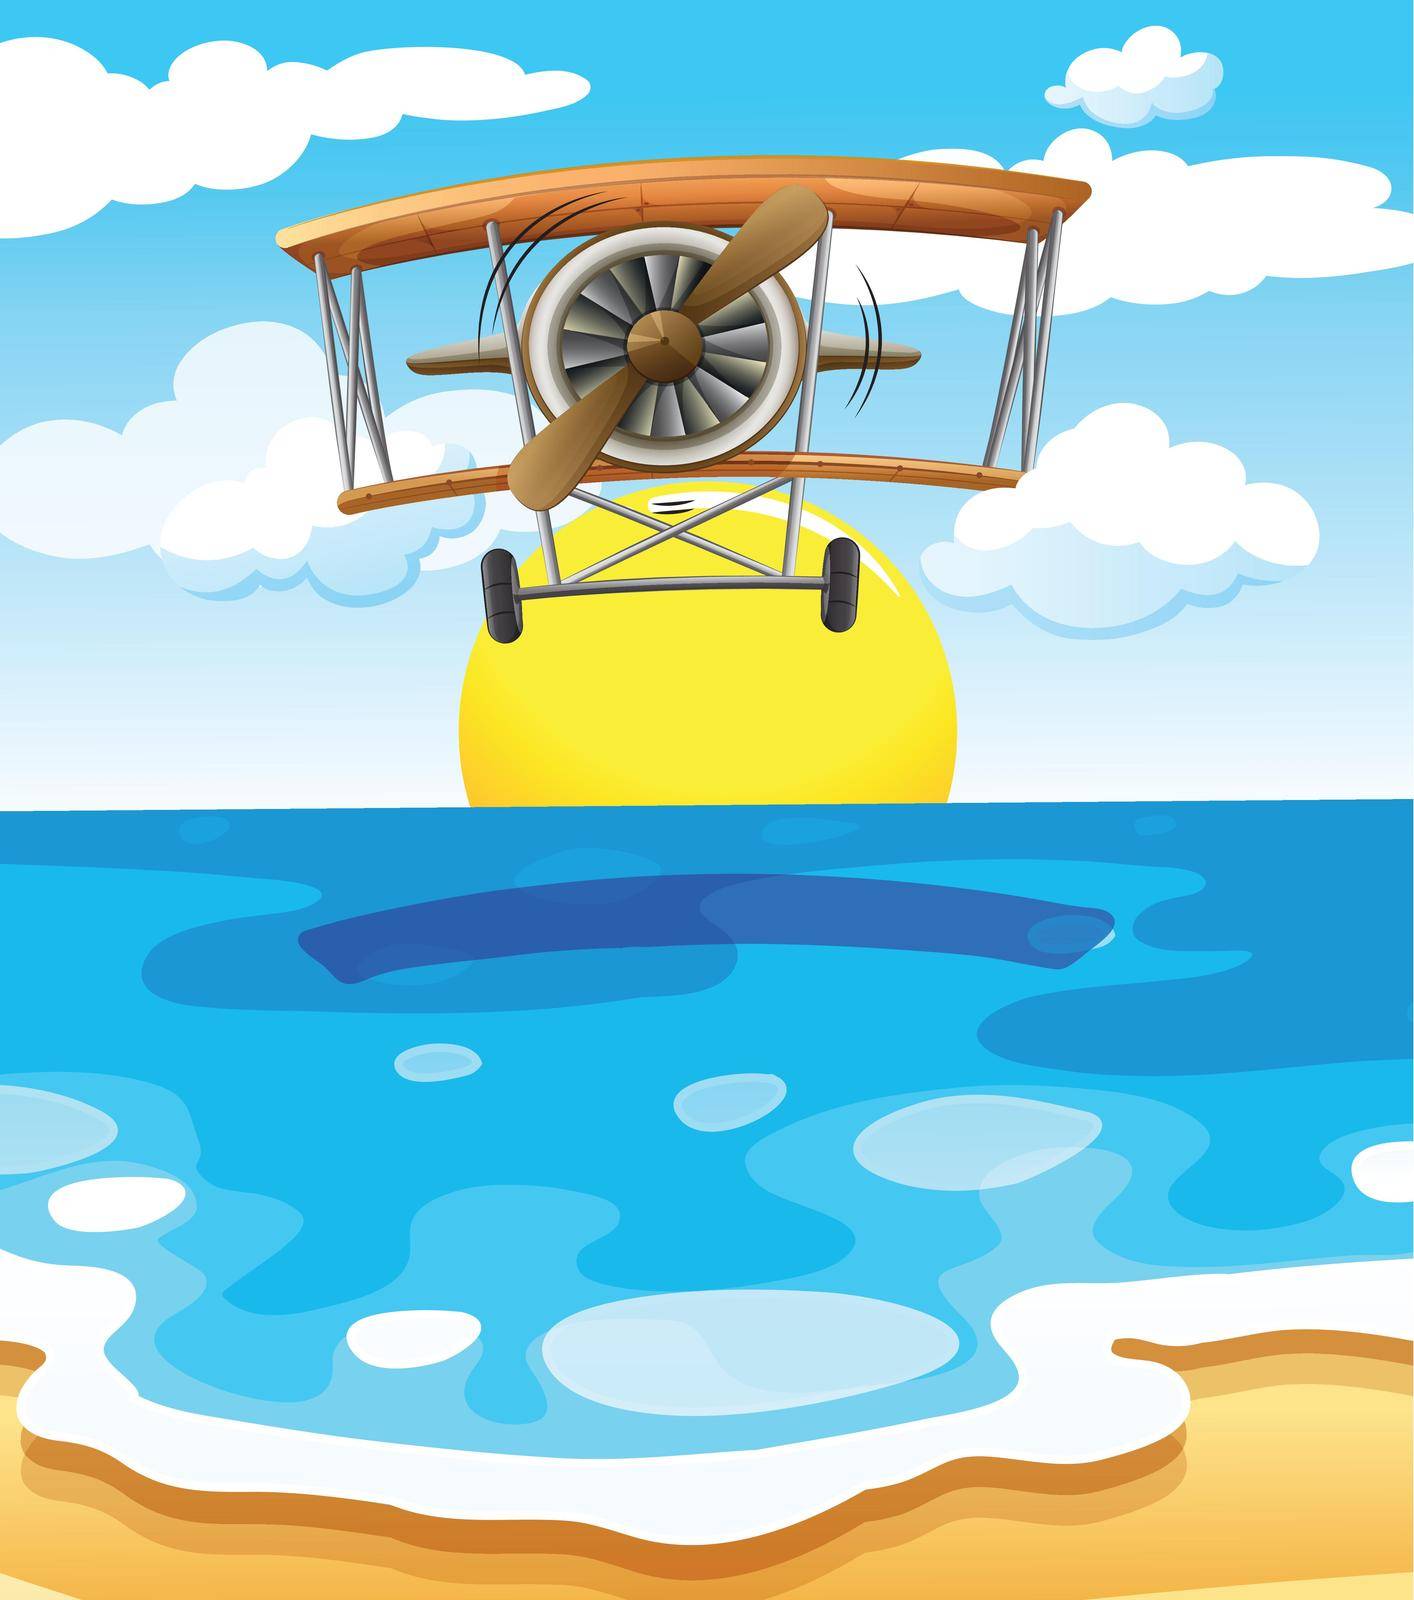 Illustration of a plane flying above the sea